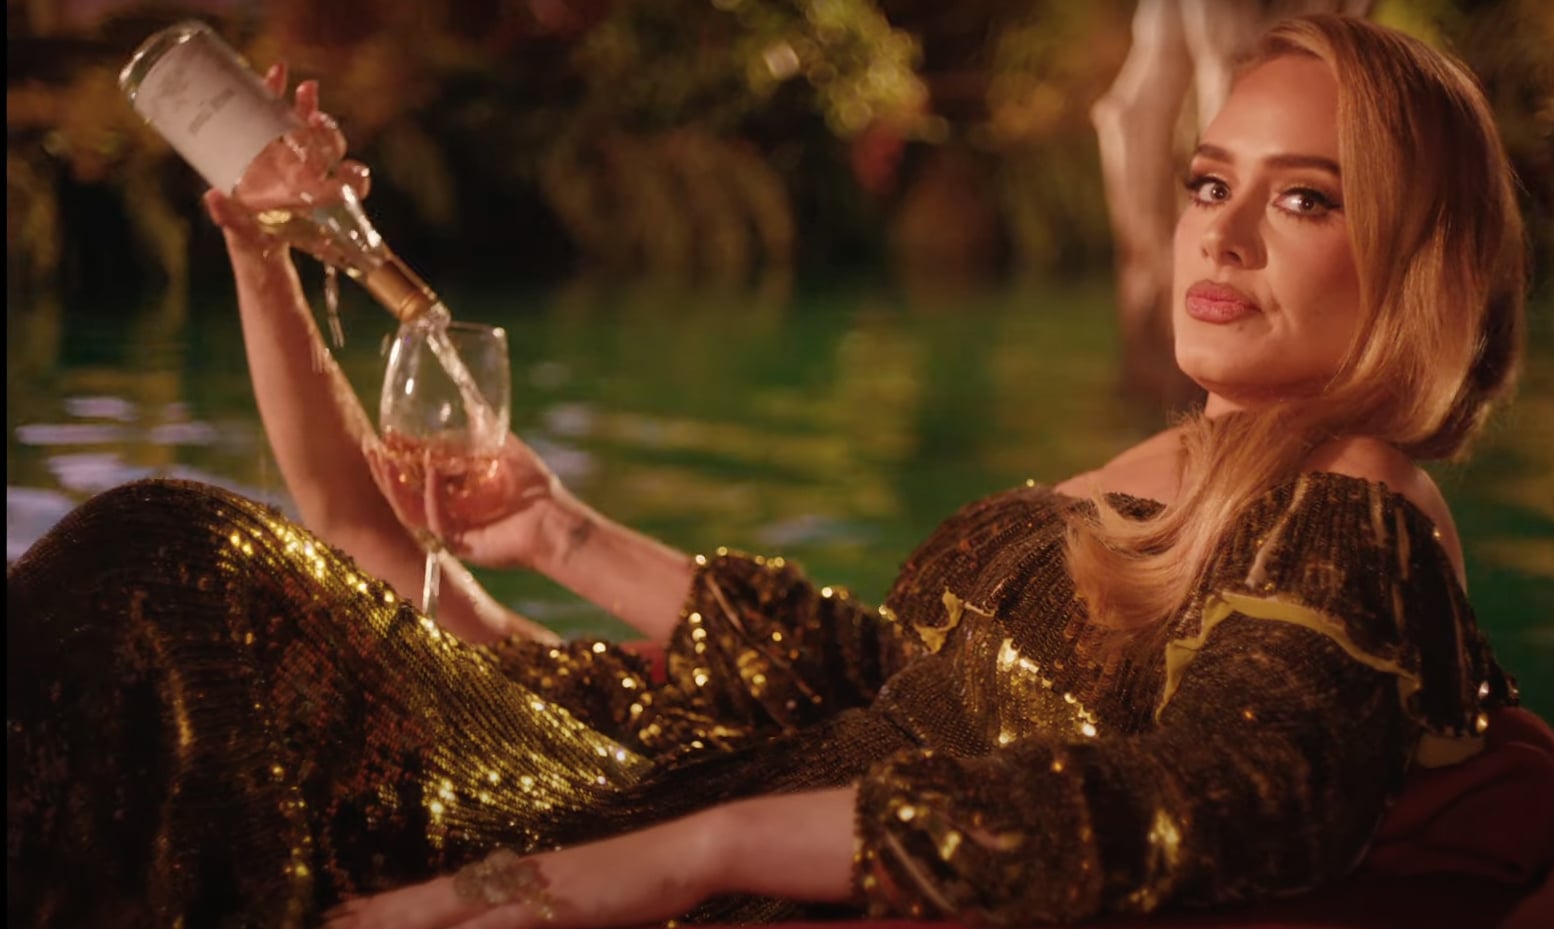 Adele Floats Along a River With a Glass of Rosé in the Dreamy “I Drink Wine” Video